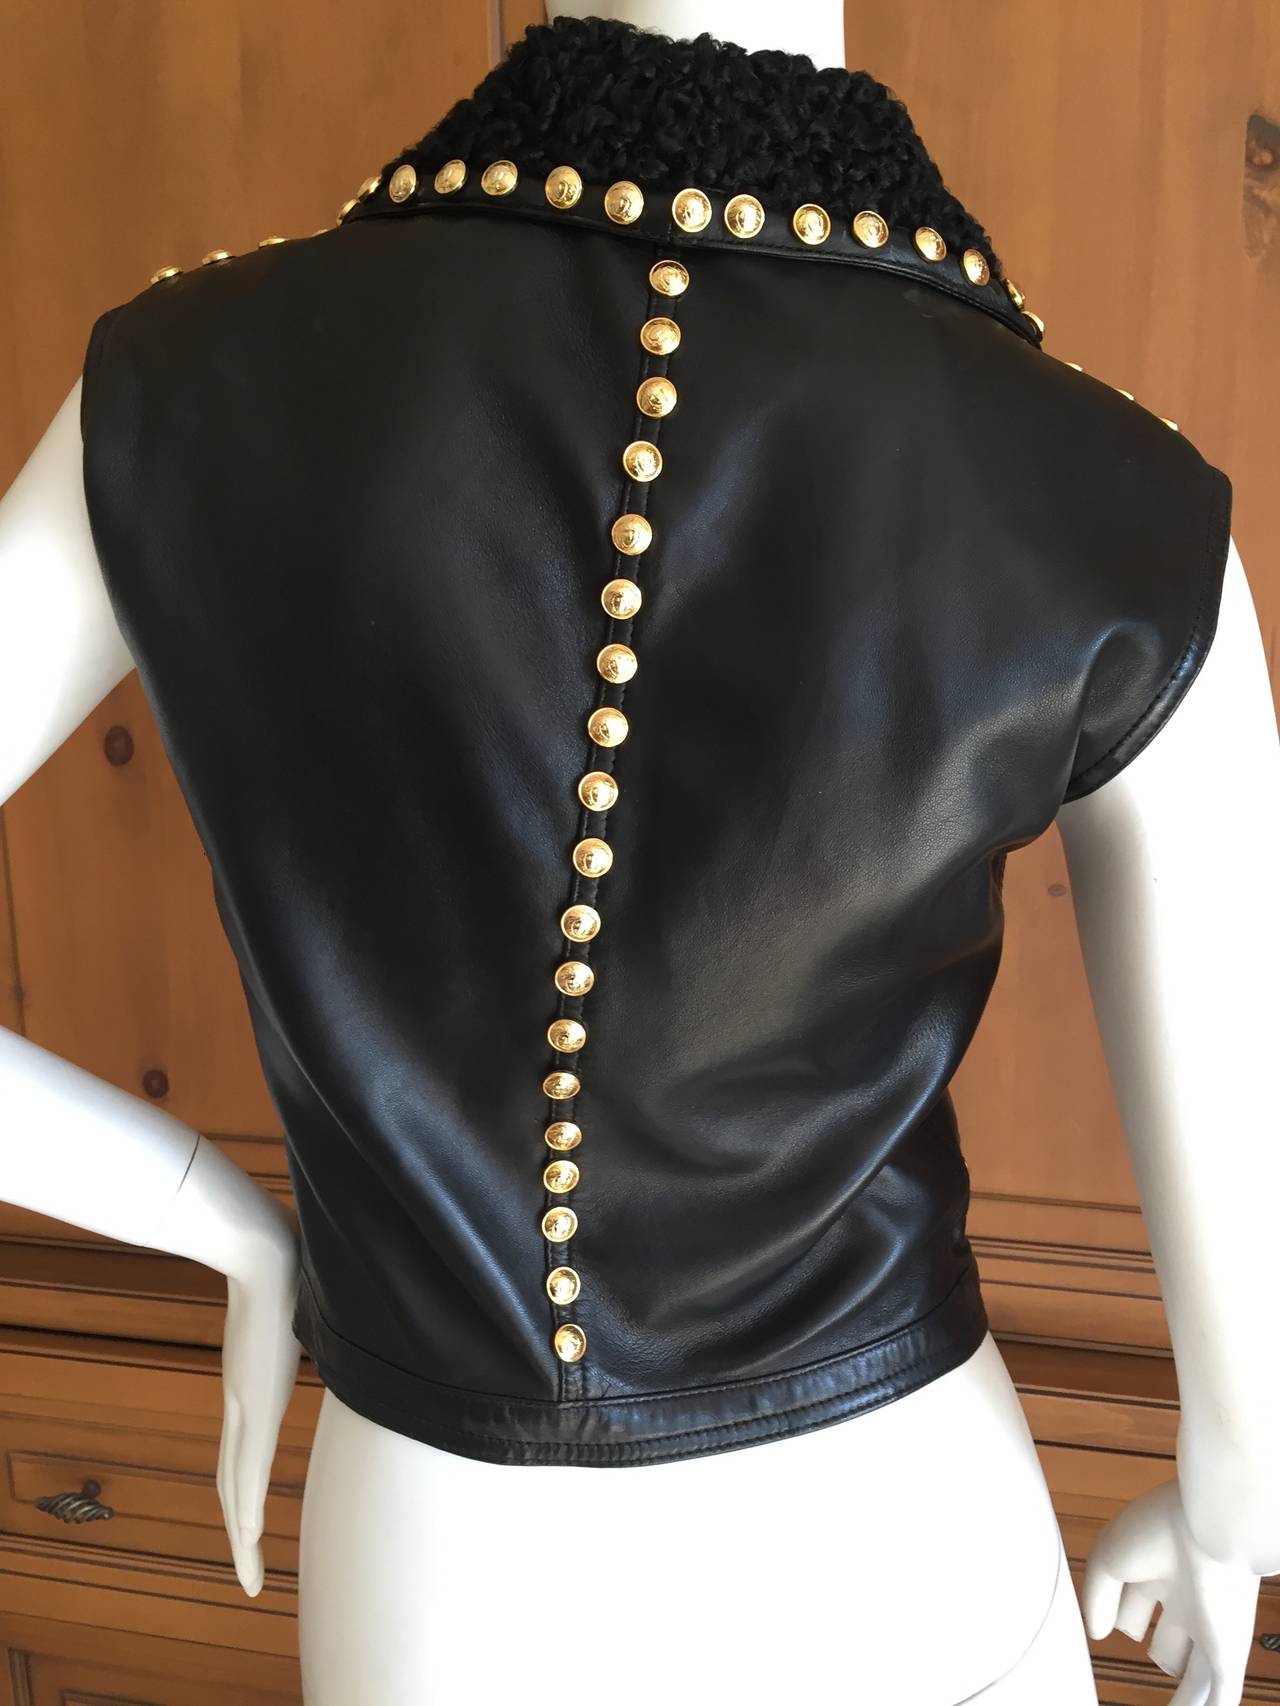 Iconic 1992 black leather vest with lamb fur collar and dozens of golden Medusa head studs.
This piece was immortalized in the Irving Penn photographs in the 1992 Versace look book on Karen Mulder and Christy Turlington.
Sz Small